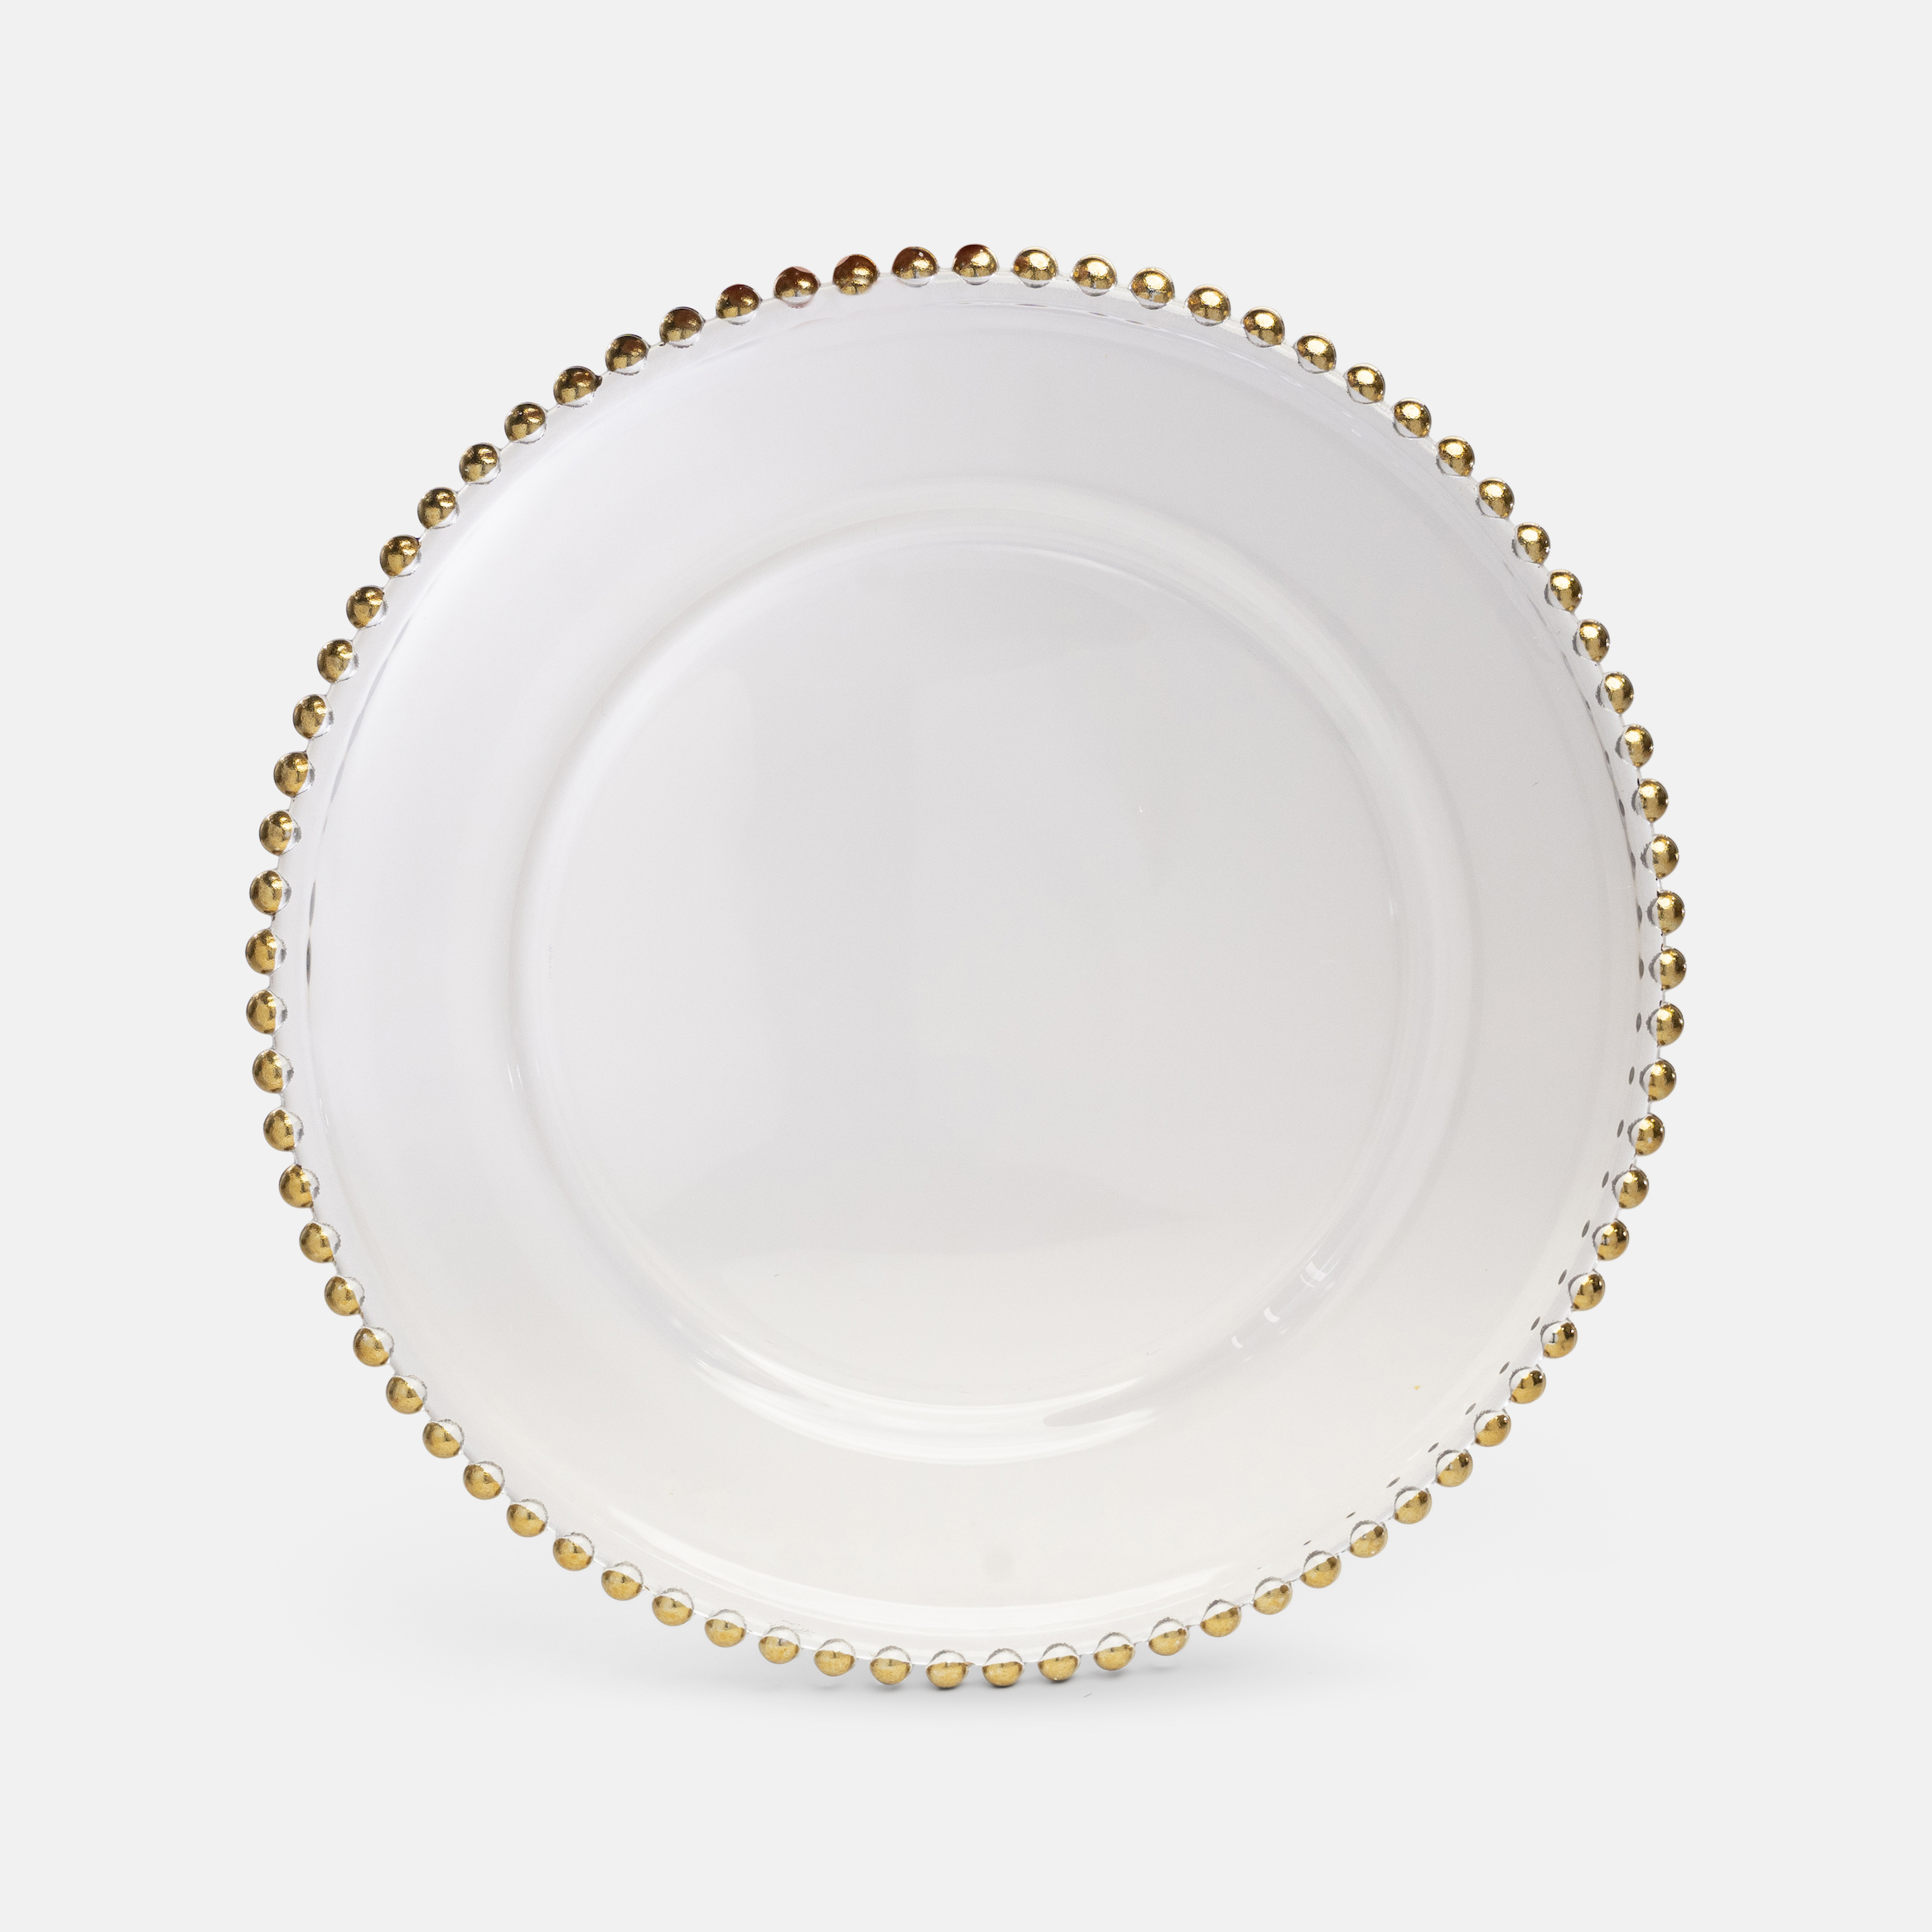 7. BEADED RIM Charger, Gold